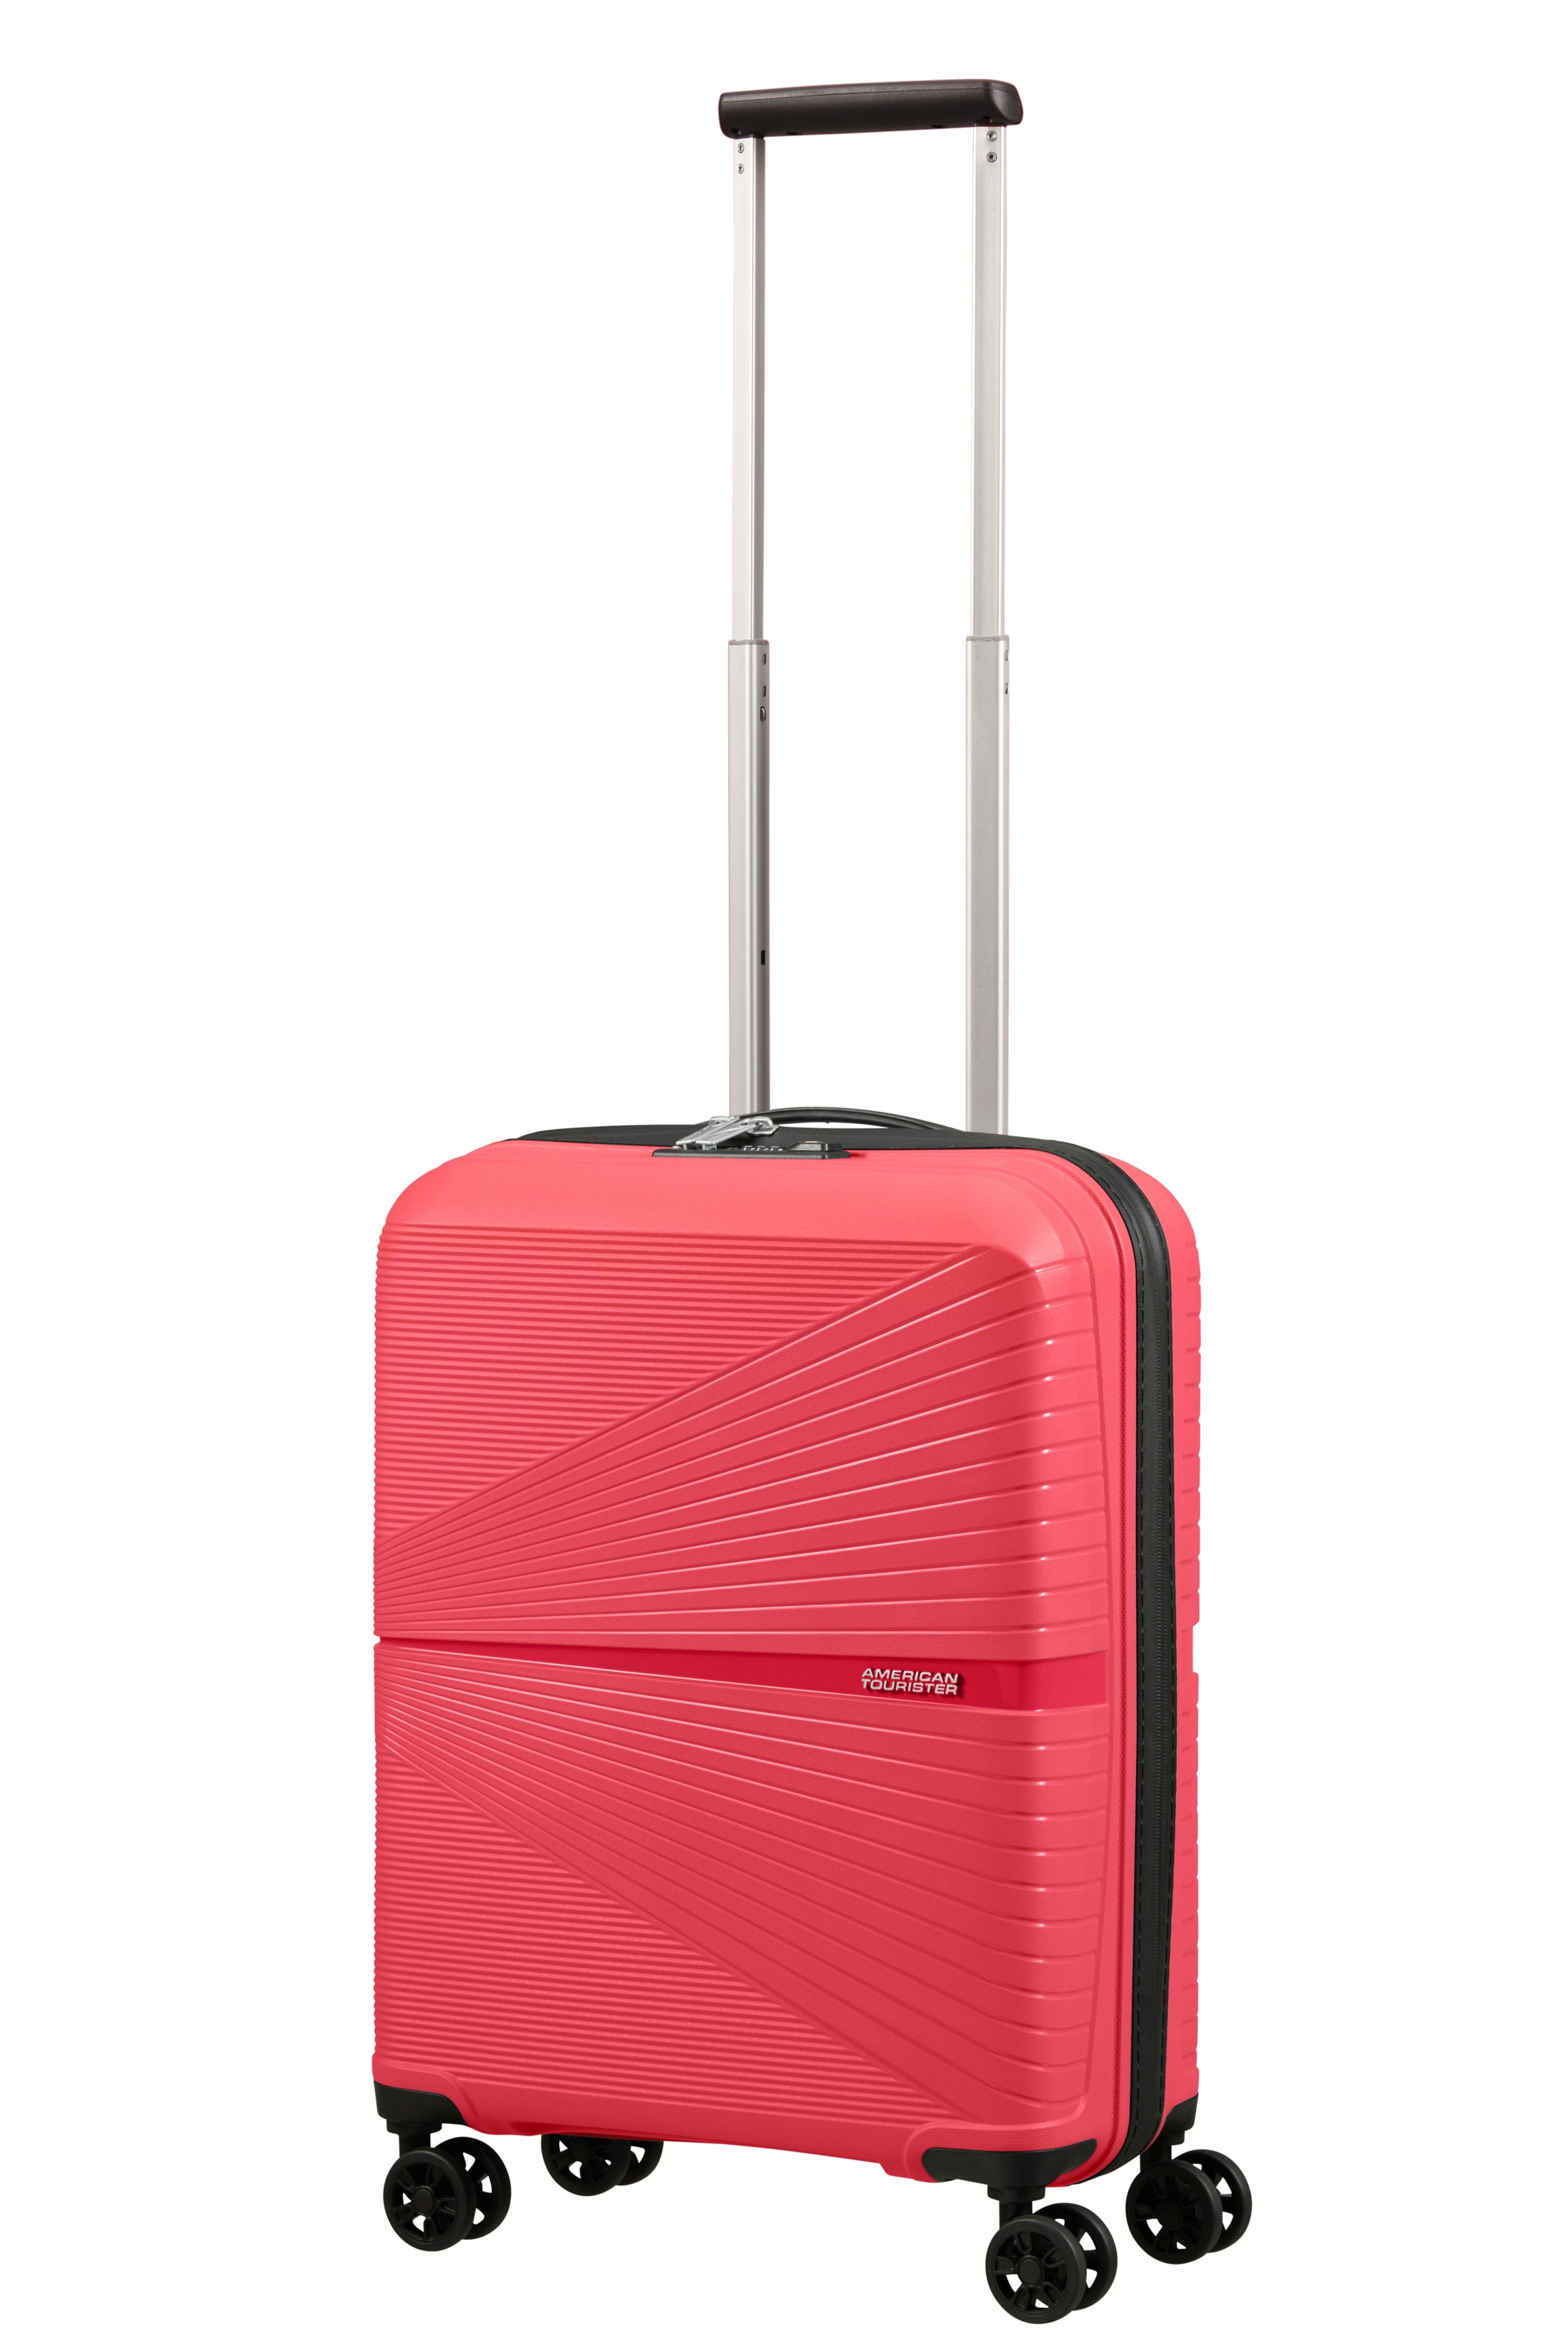 American Tourister - Airconic 55cm Small 4 Wheel Hard Suitcase - Paradise Pink